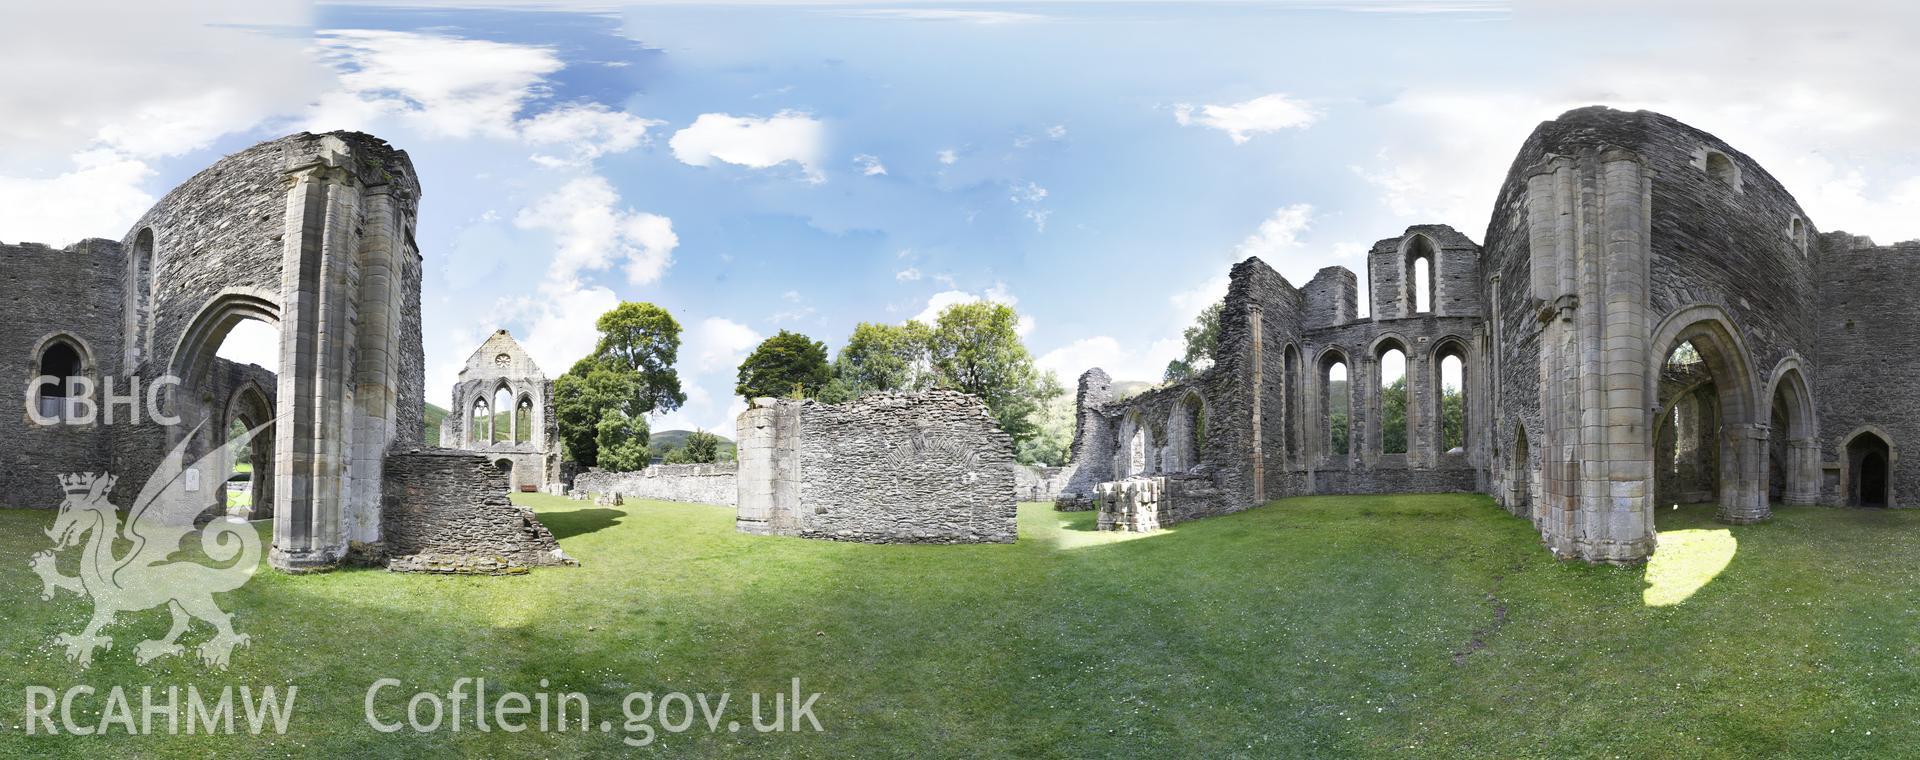 Reduced resolution .tiff file of stitched images in the east end of the abbey church at Valle Crucis Abbey, carried out by Sue Fielding and Rita Singer, July 2017. Produced through European Travellers to Wales project.